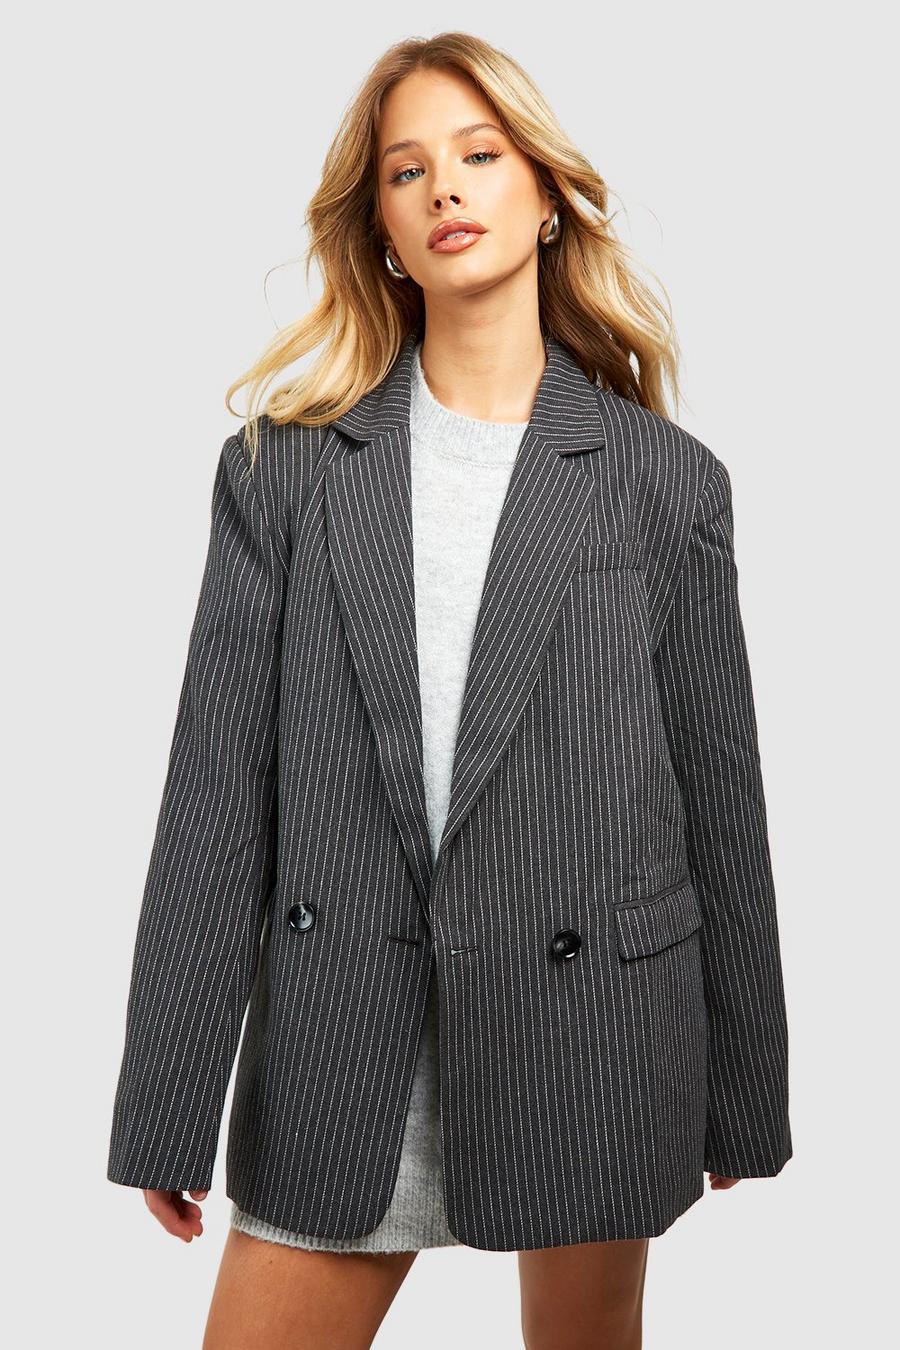 Charcoal Marl Pinstripe Relaxed Fit Tailored Blazer